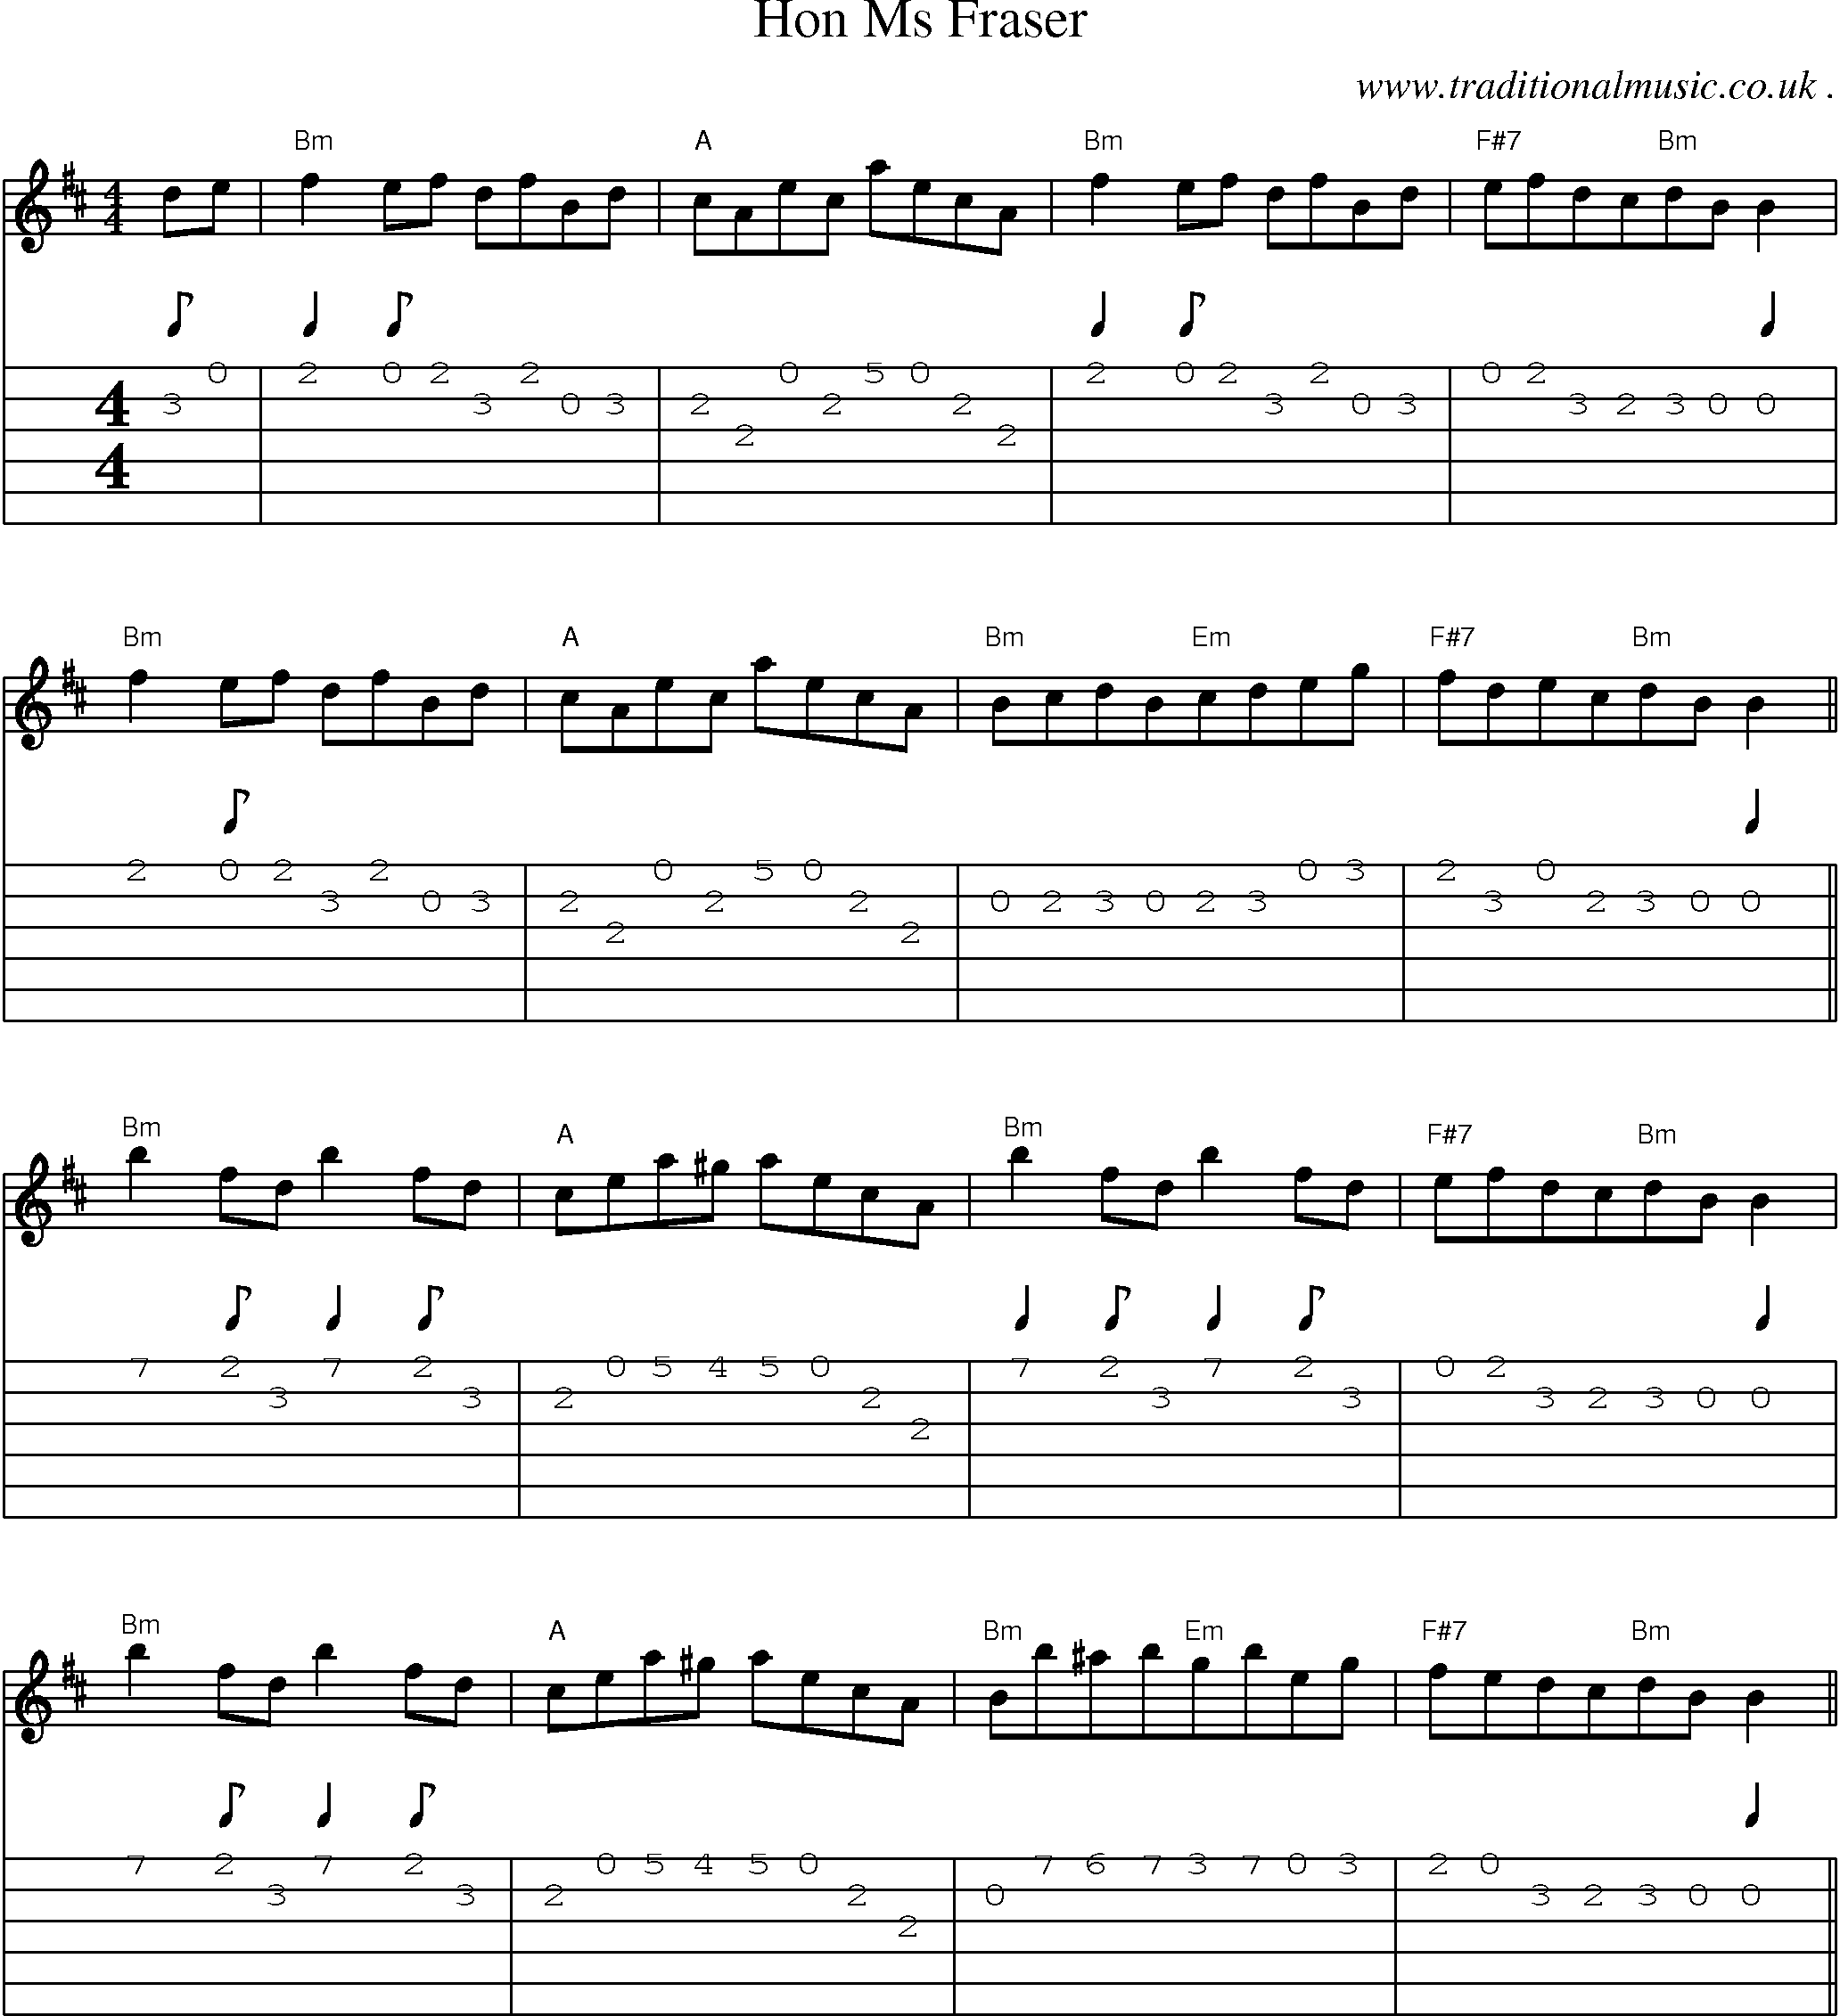 Sheet-Music and Guitar Tabs for Hon Ms Fraser